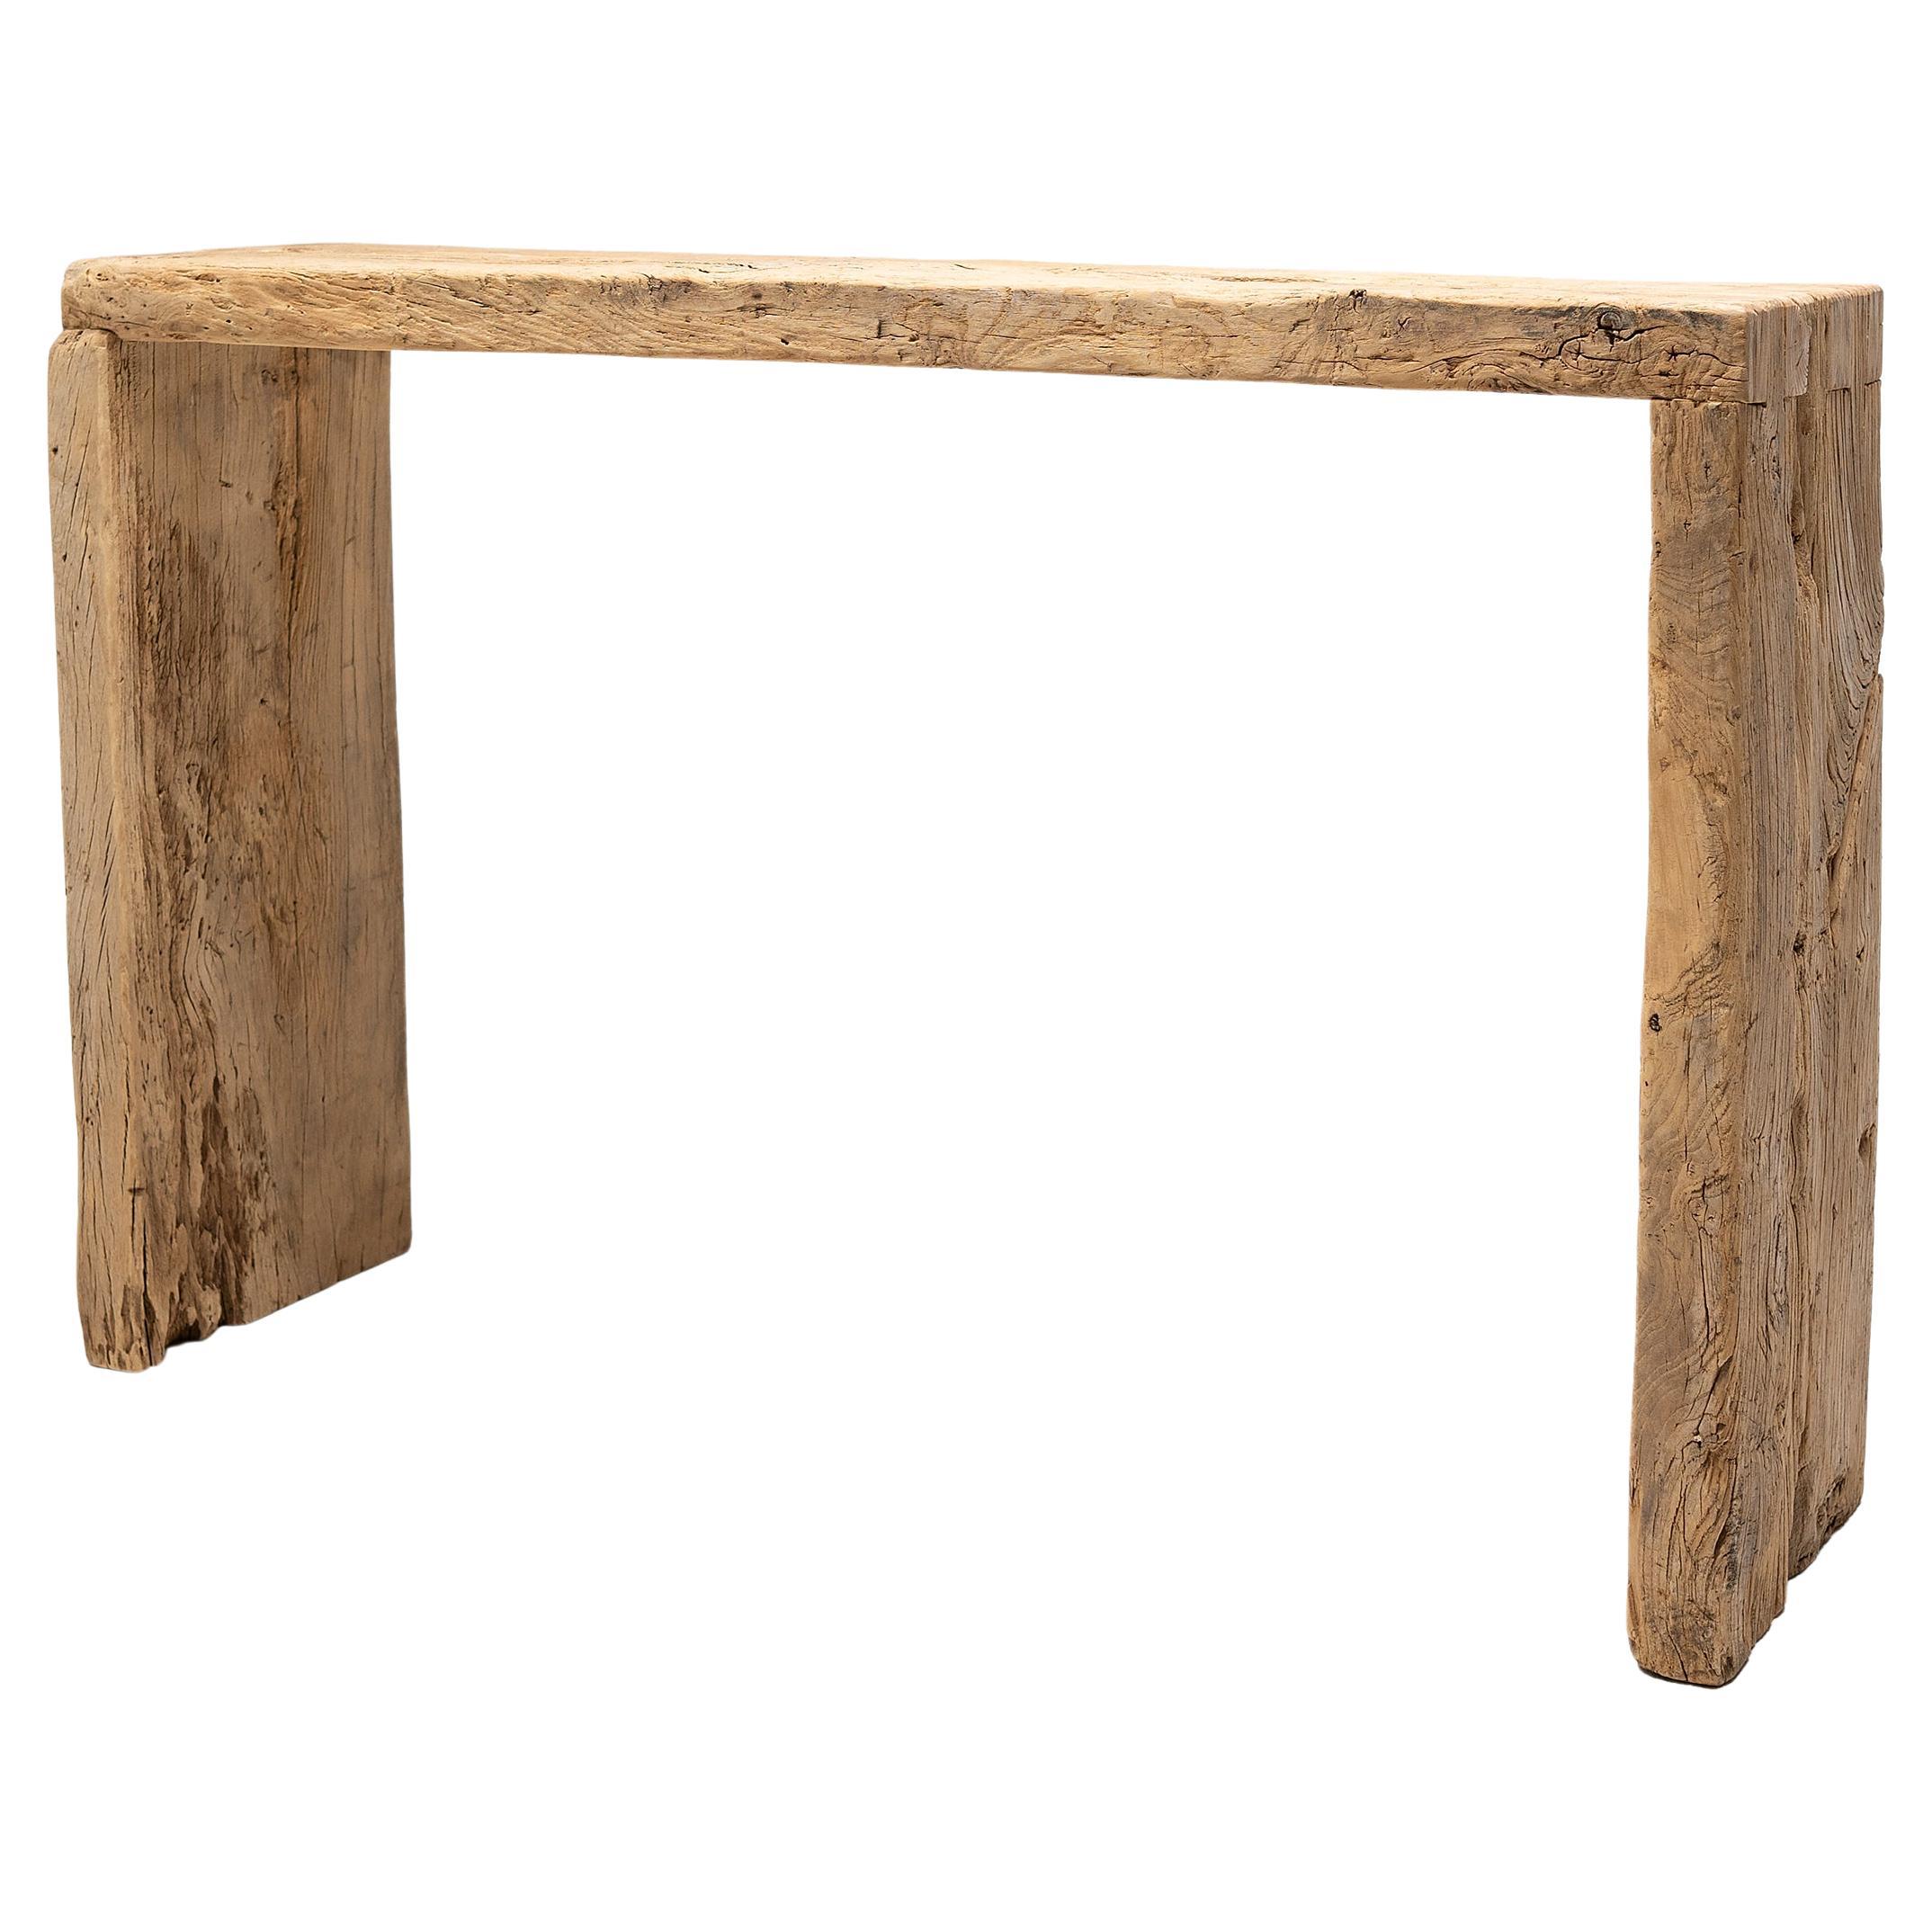 Chinese Reclaimed Elm Waterfall Table For Sale